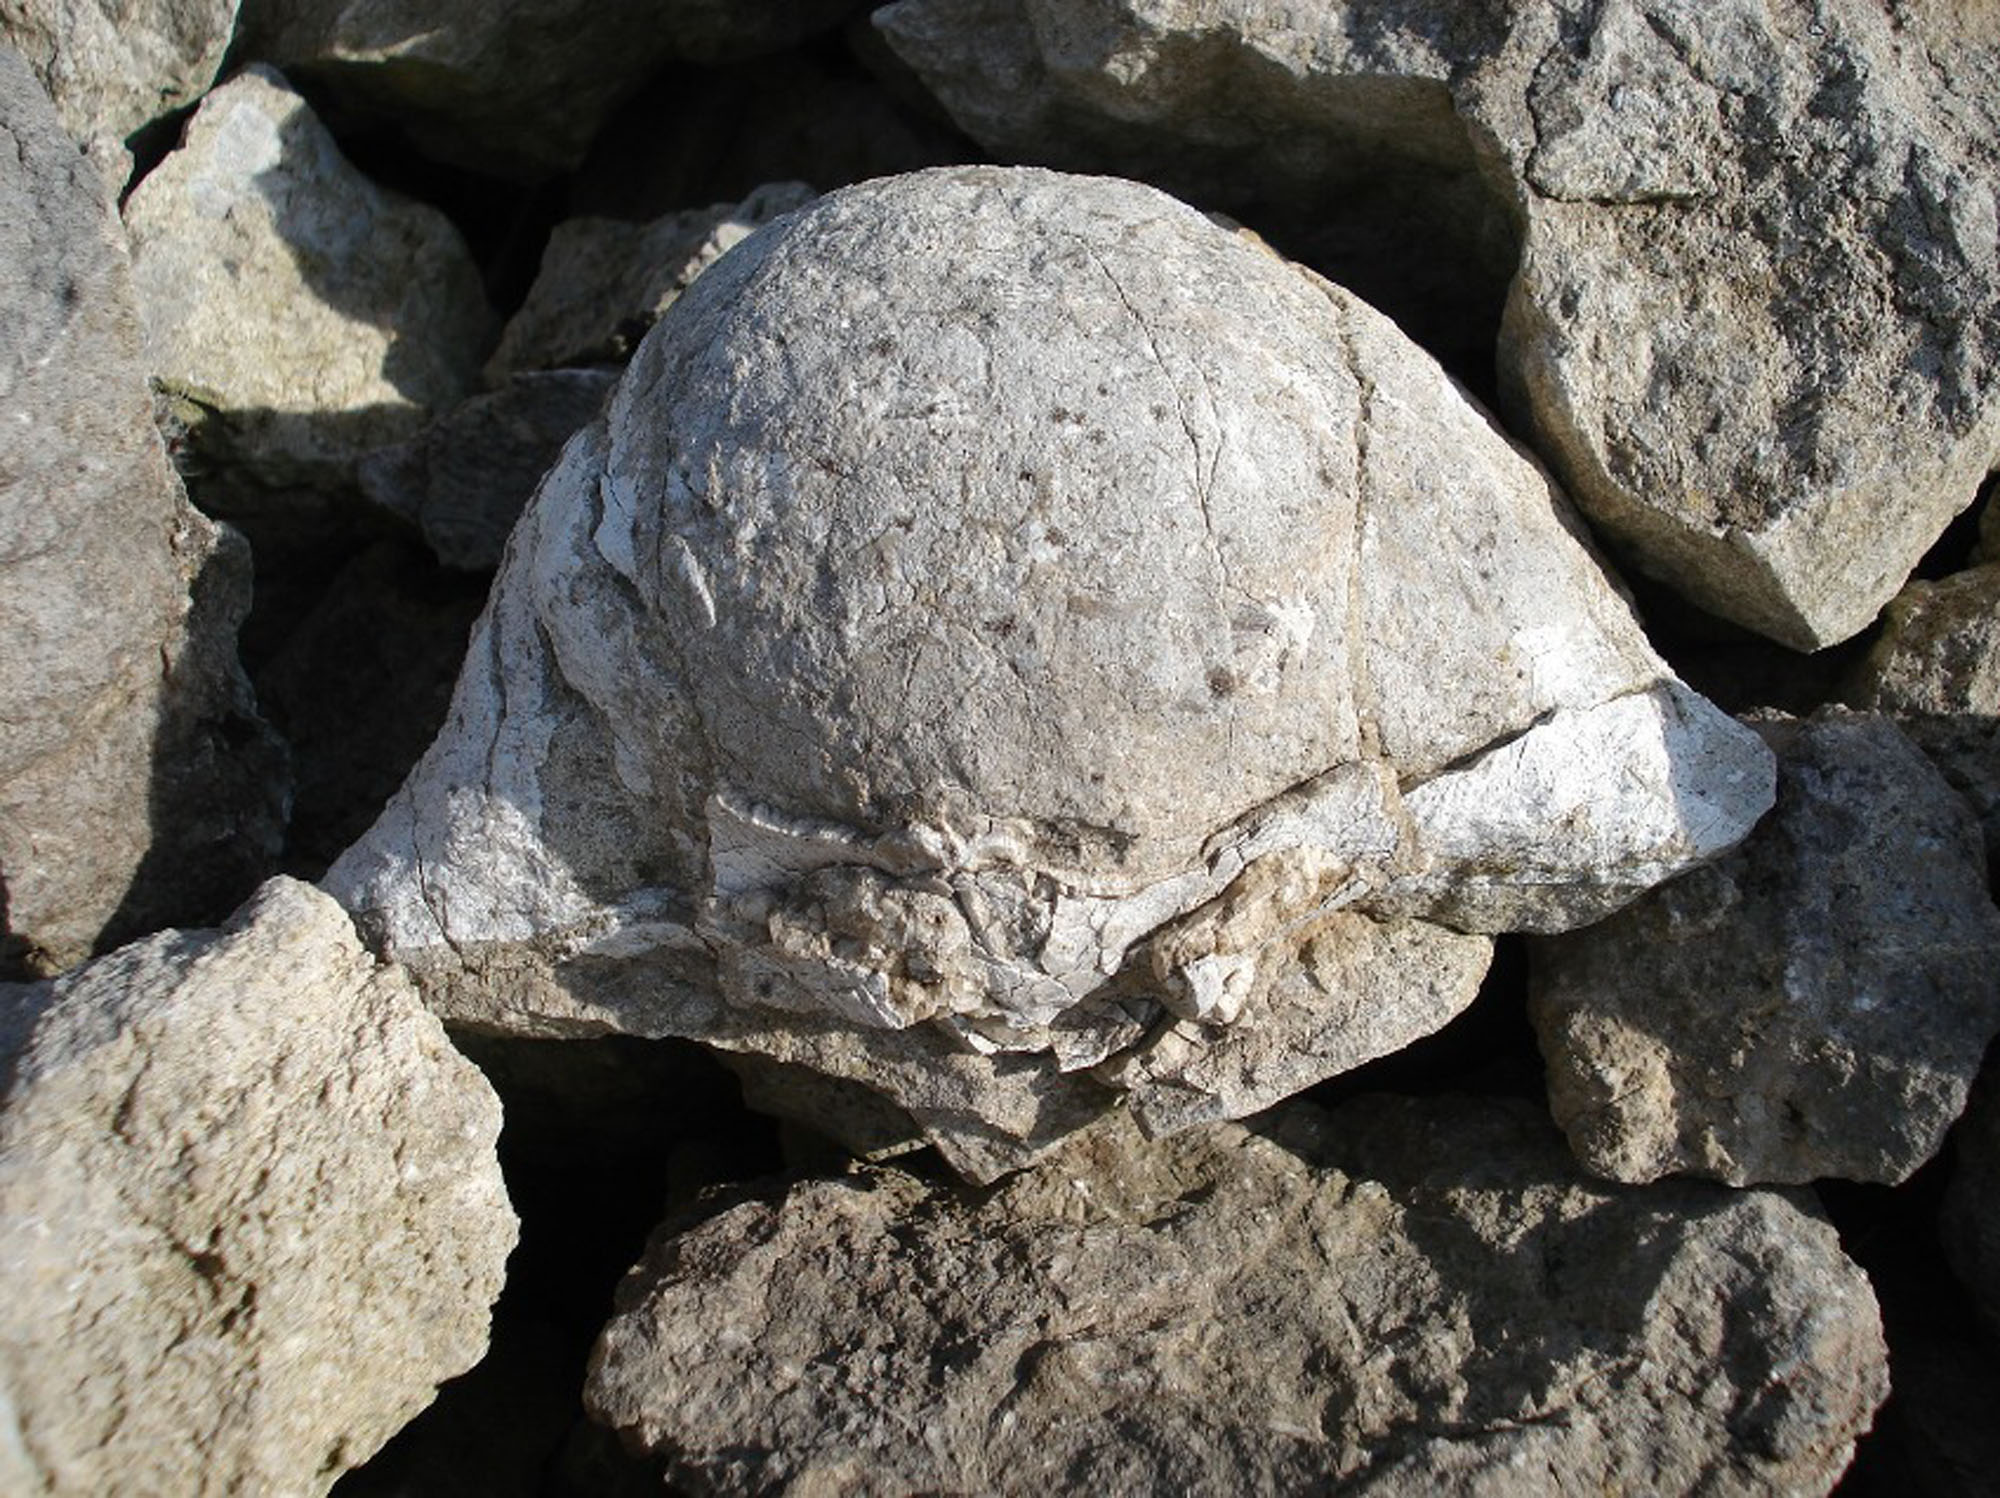 Large brachiopod from the limestone outcrop (2)